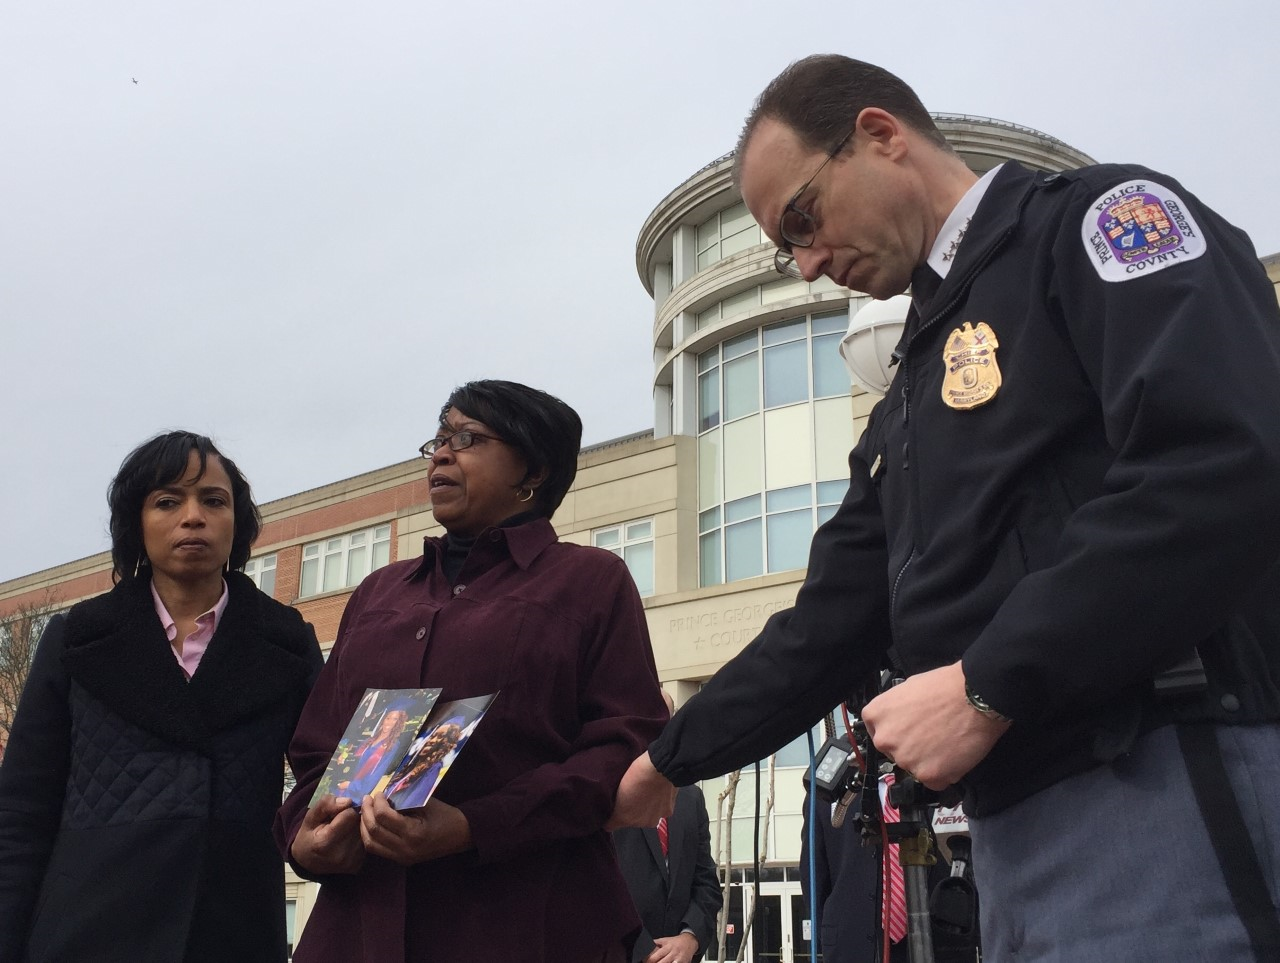 Lydia Banks talks about her daughter Allyssa, who was killed in October 2016. She's supported by Prince George's County State's Attorney Angela Alsobrooks, at left, and Police Chief Hank Stawinski, at right. (WTOP/Kristi King)